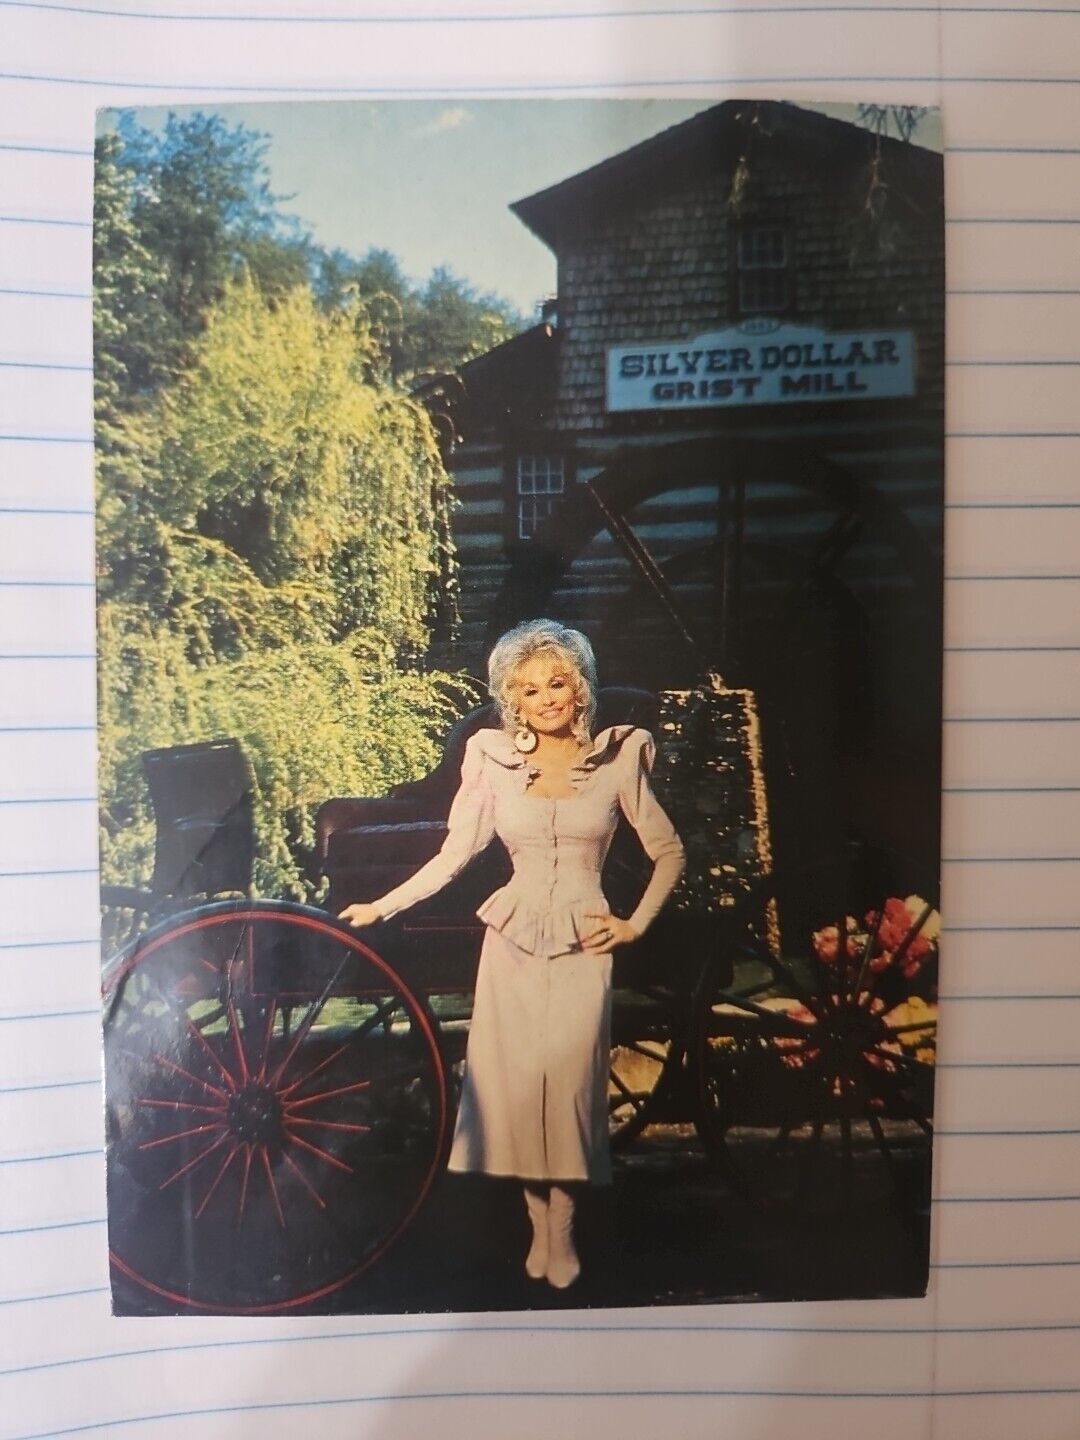 Dolly parton post card 1992 silver Dollar Grist Mill- Dollywood Post Card